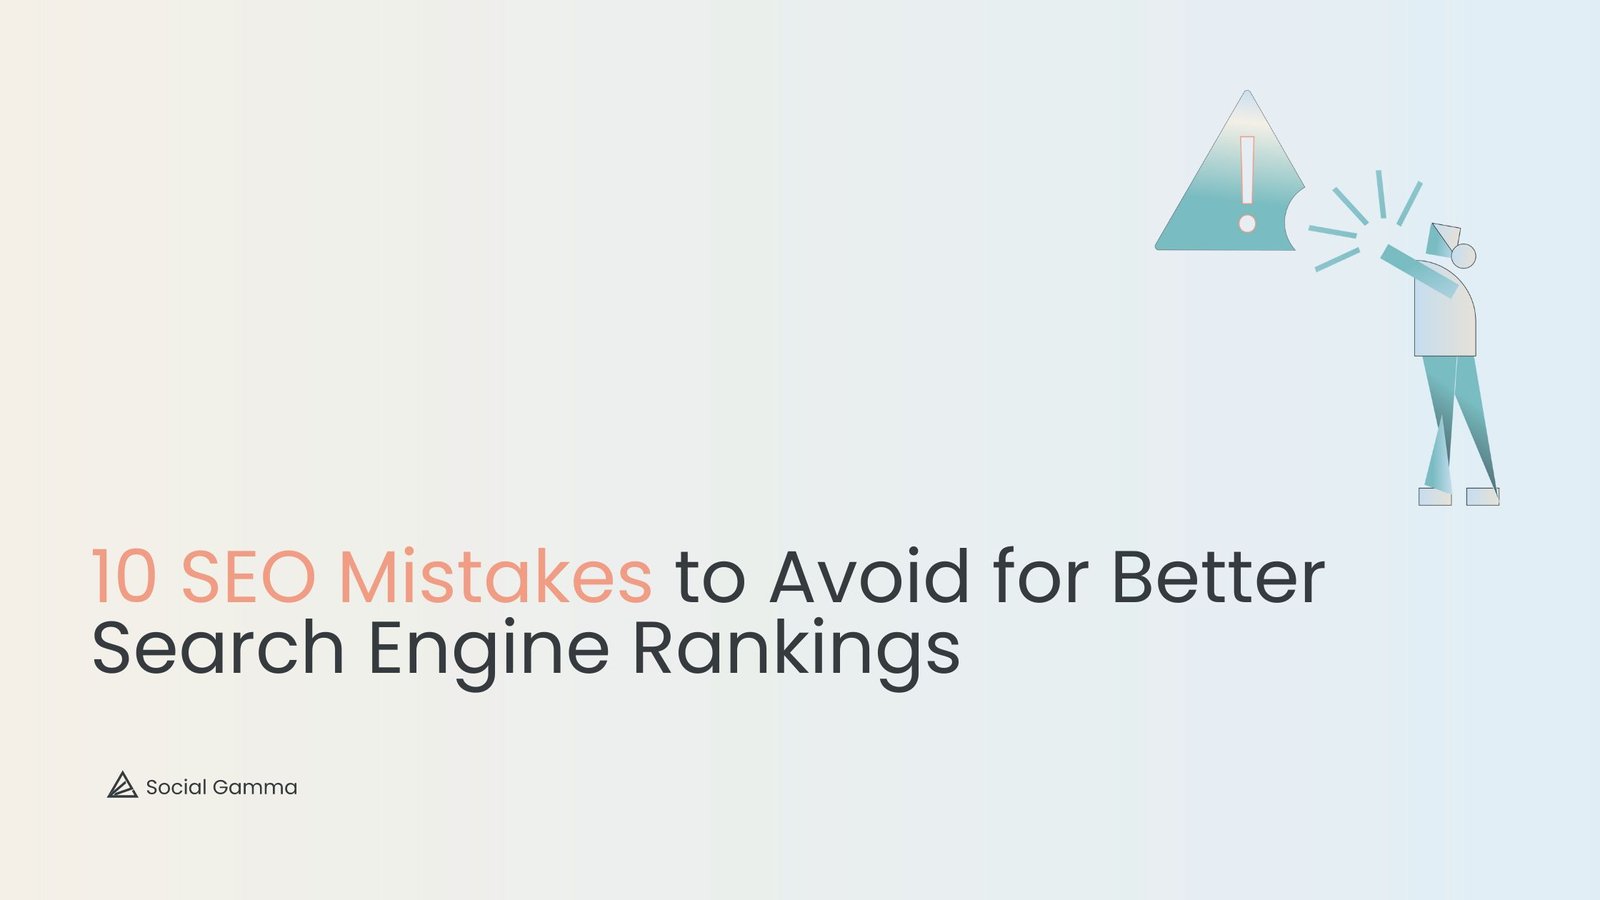 10 SEO Mistakes to Avoid for Better Search Engine Rankings